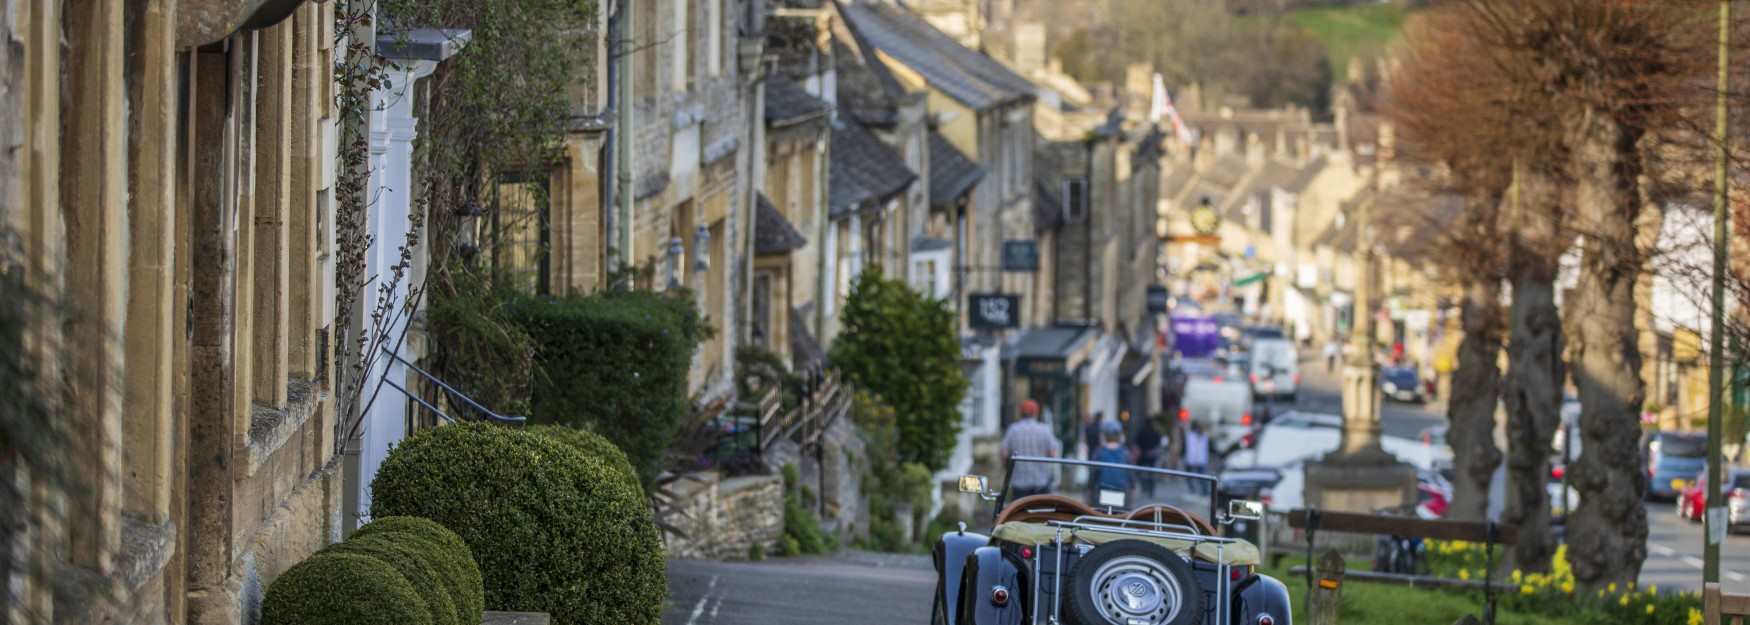 A classic car parked with Burford High Street in the distance